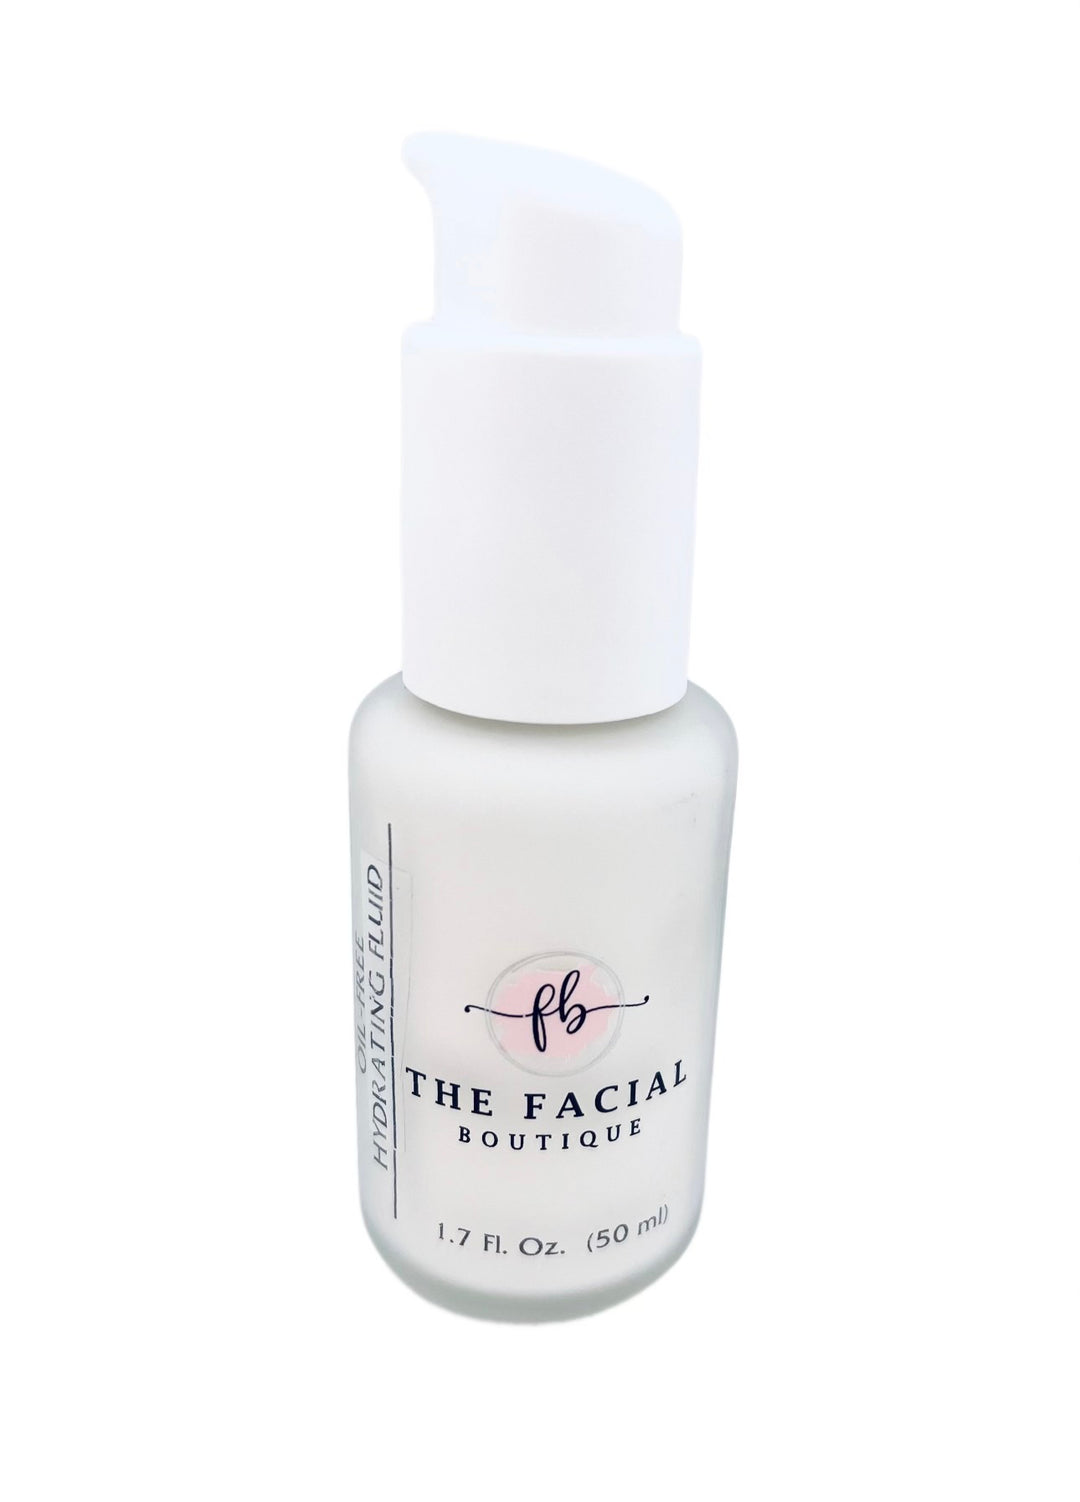 Embrace Effortless Hydration with The Facial Boutique’s Oil-Free Hydrating Fluid at Beauty Room Destin